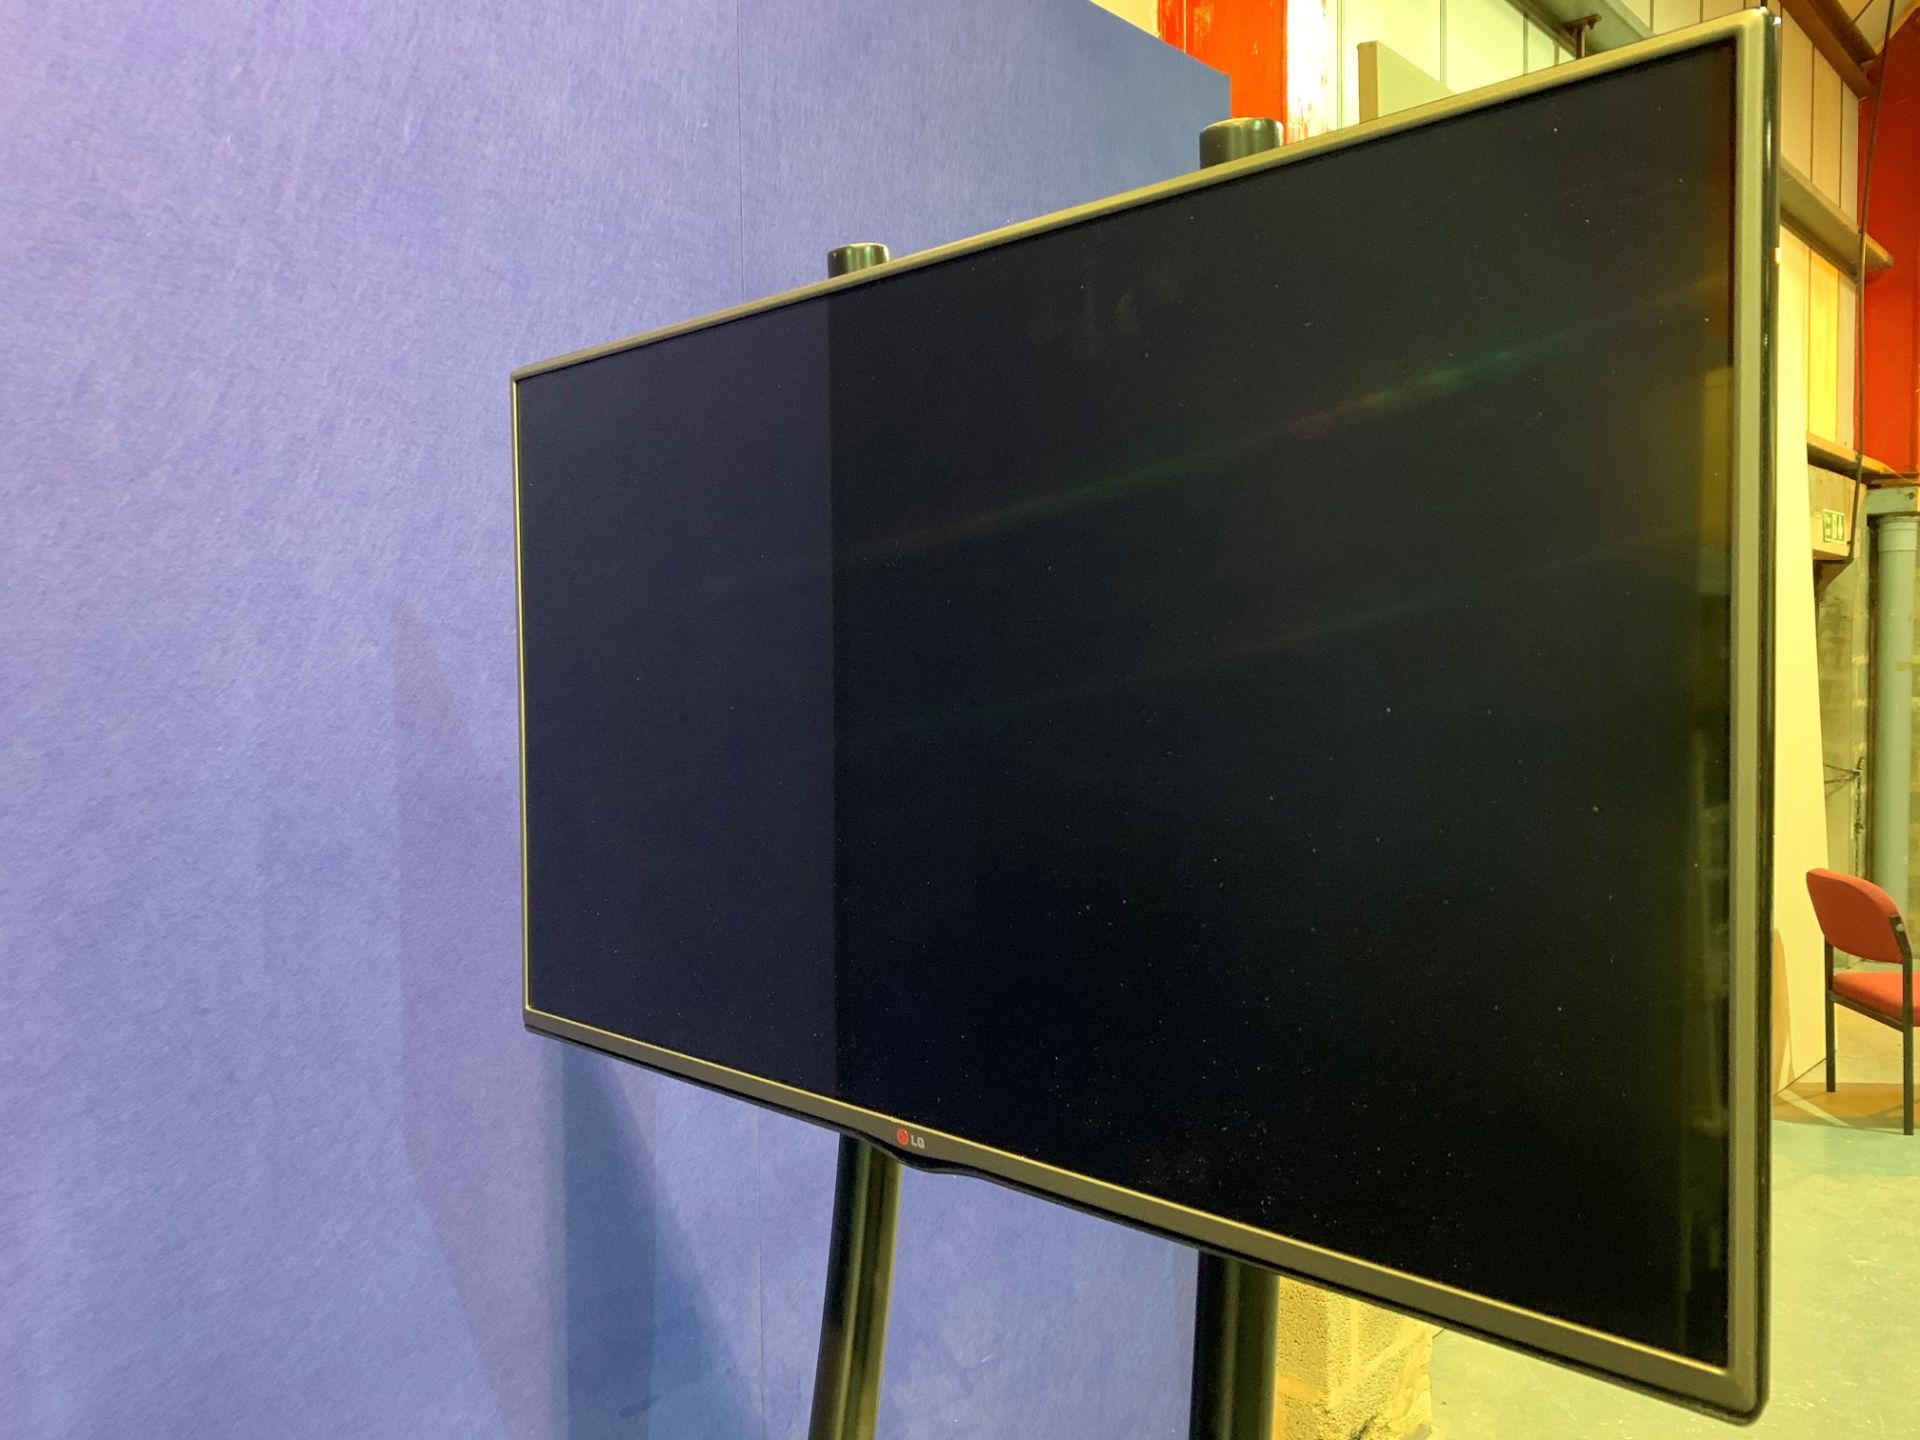 LG 42" 1920 X 1080 LED Screen with Wall Mount, IEC and Remote Control,2 x HDMI,USB, For Flightcase - Image 4 of 6